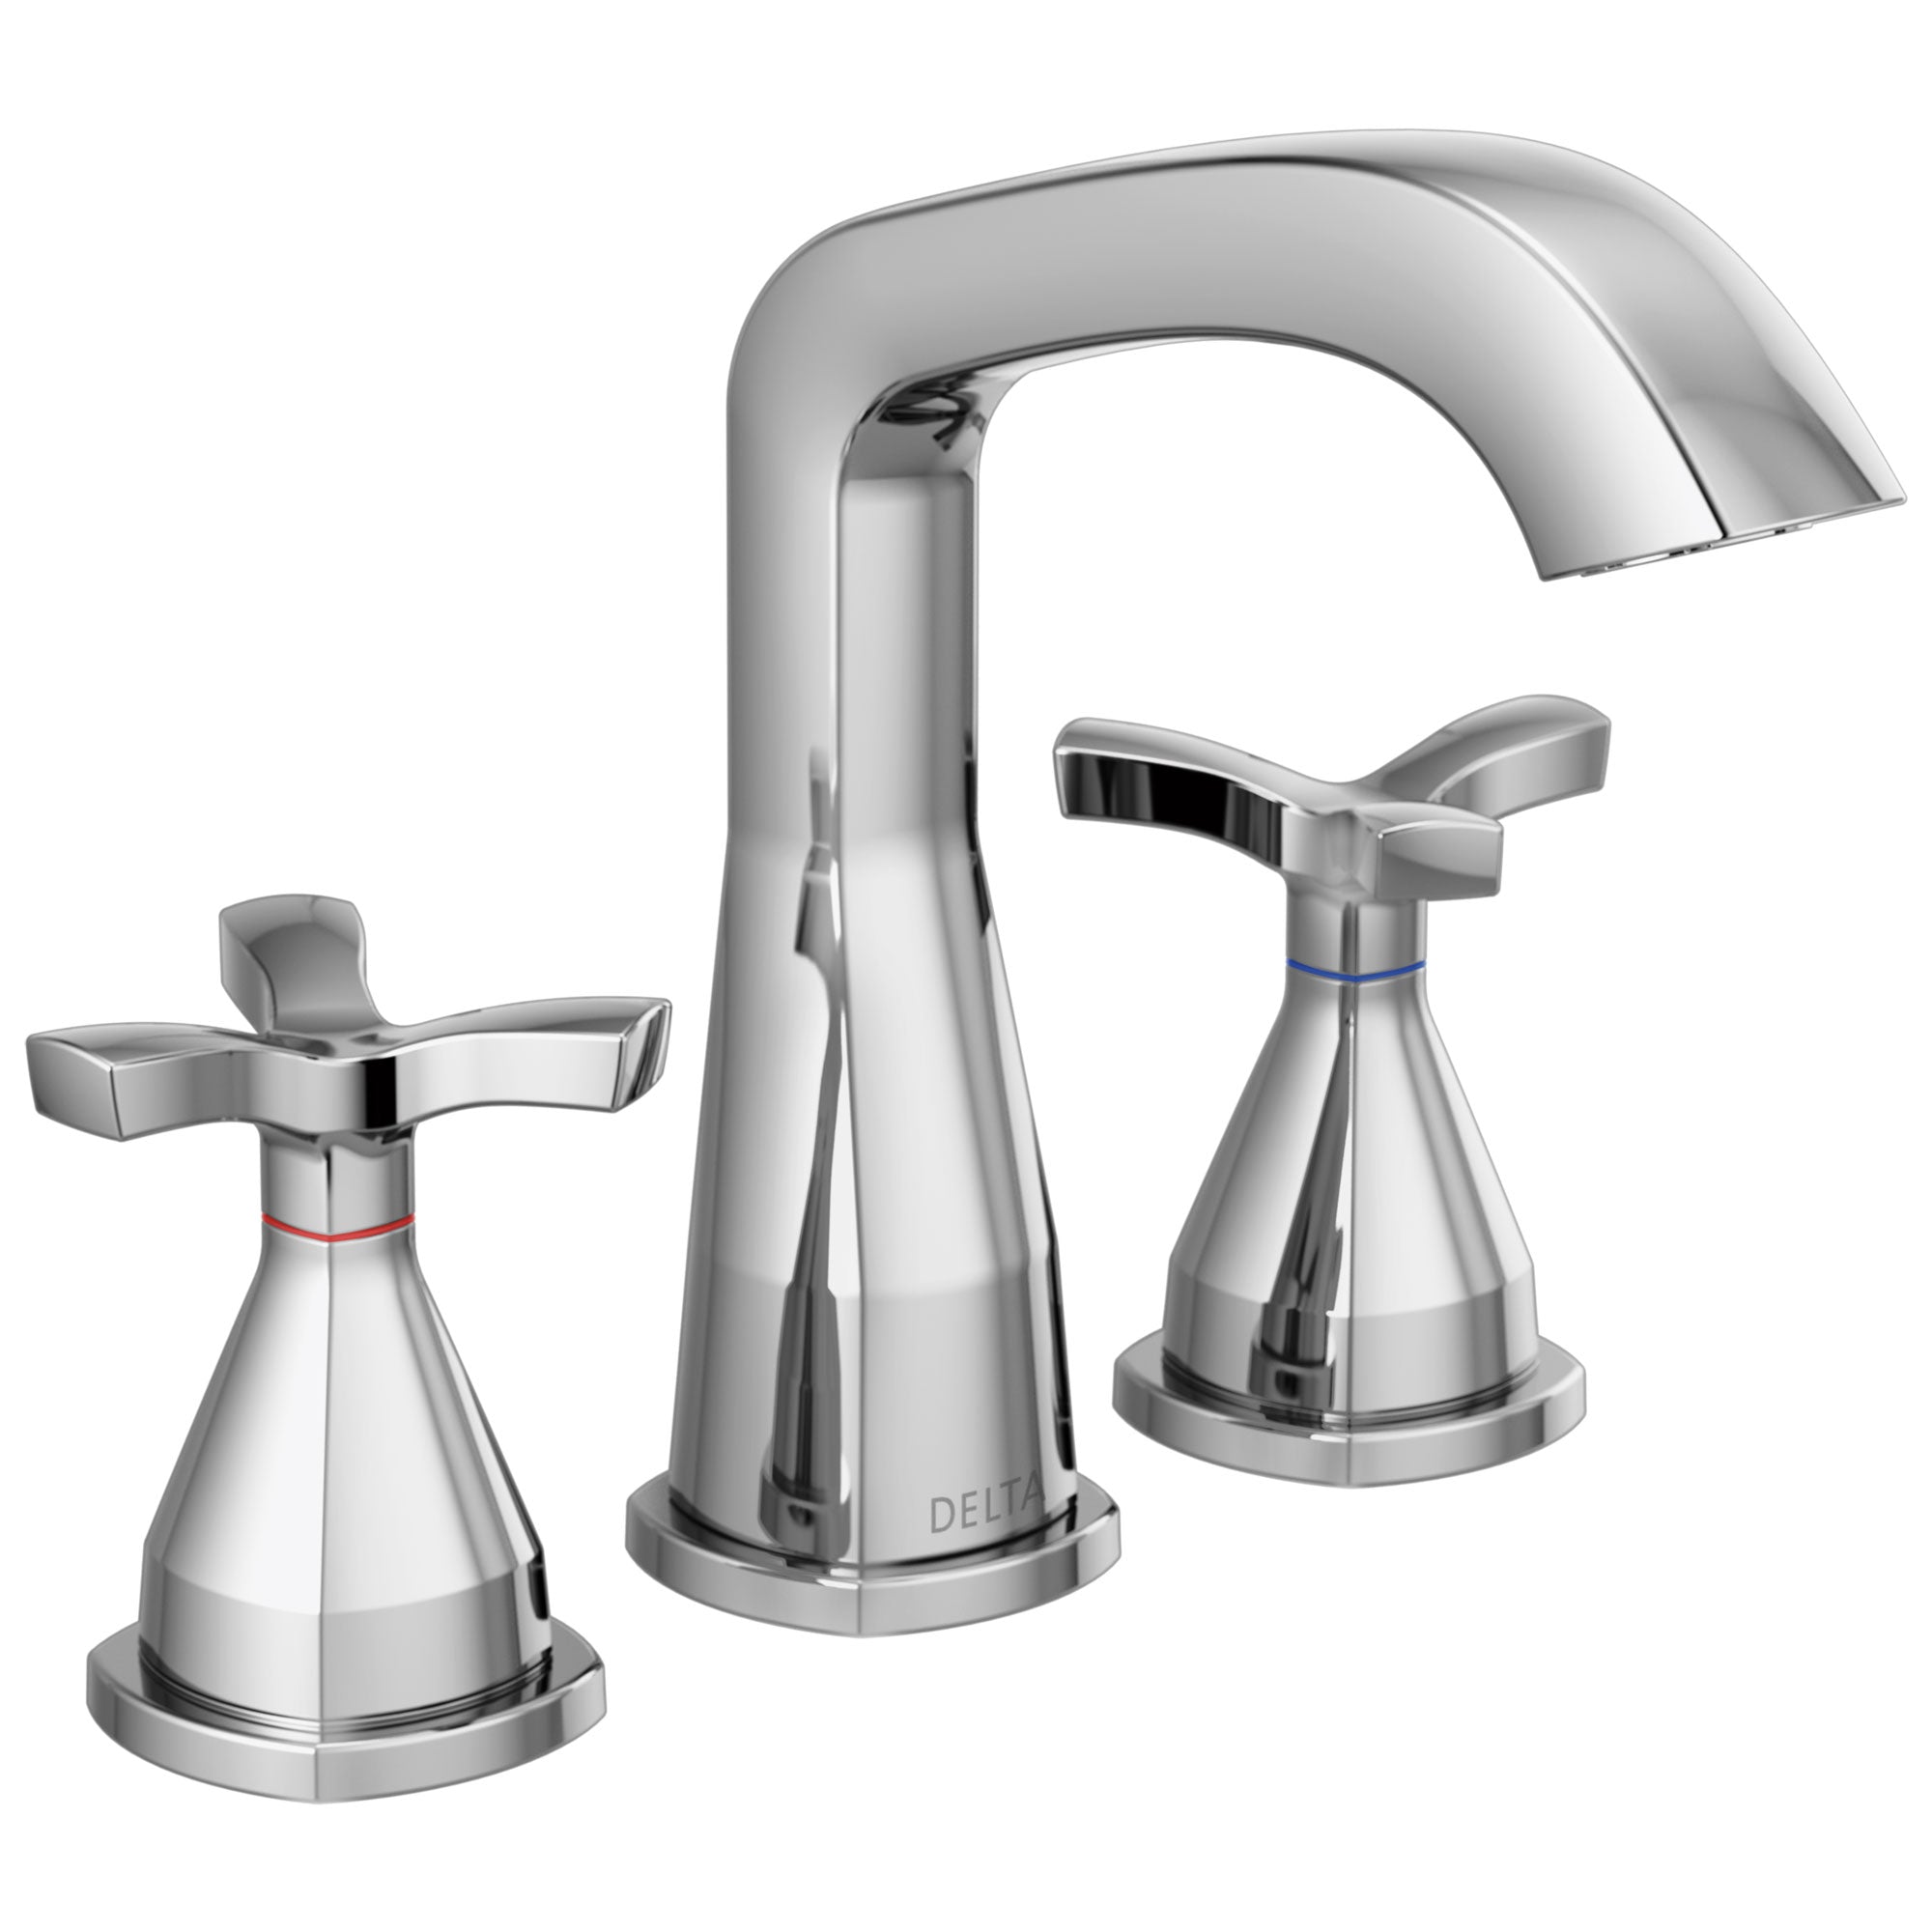 Delta Stryke Chrome Finish Widespread Bathroom Faucet with Matching Drain and Cross Handles D357766MPUDST